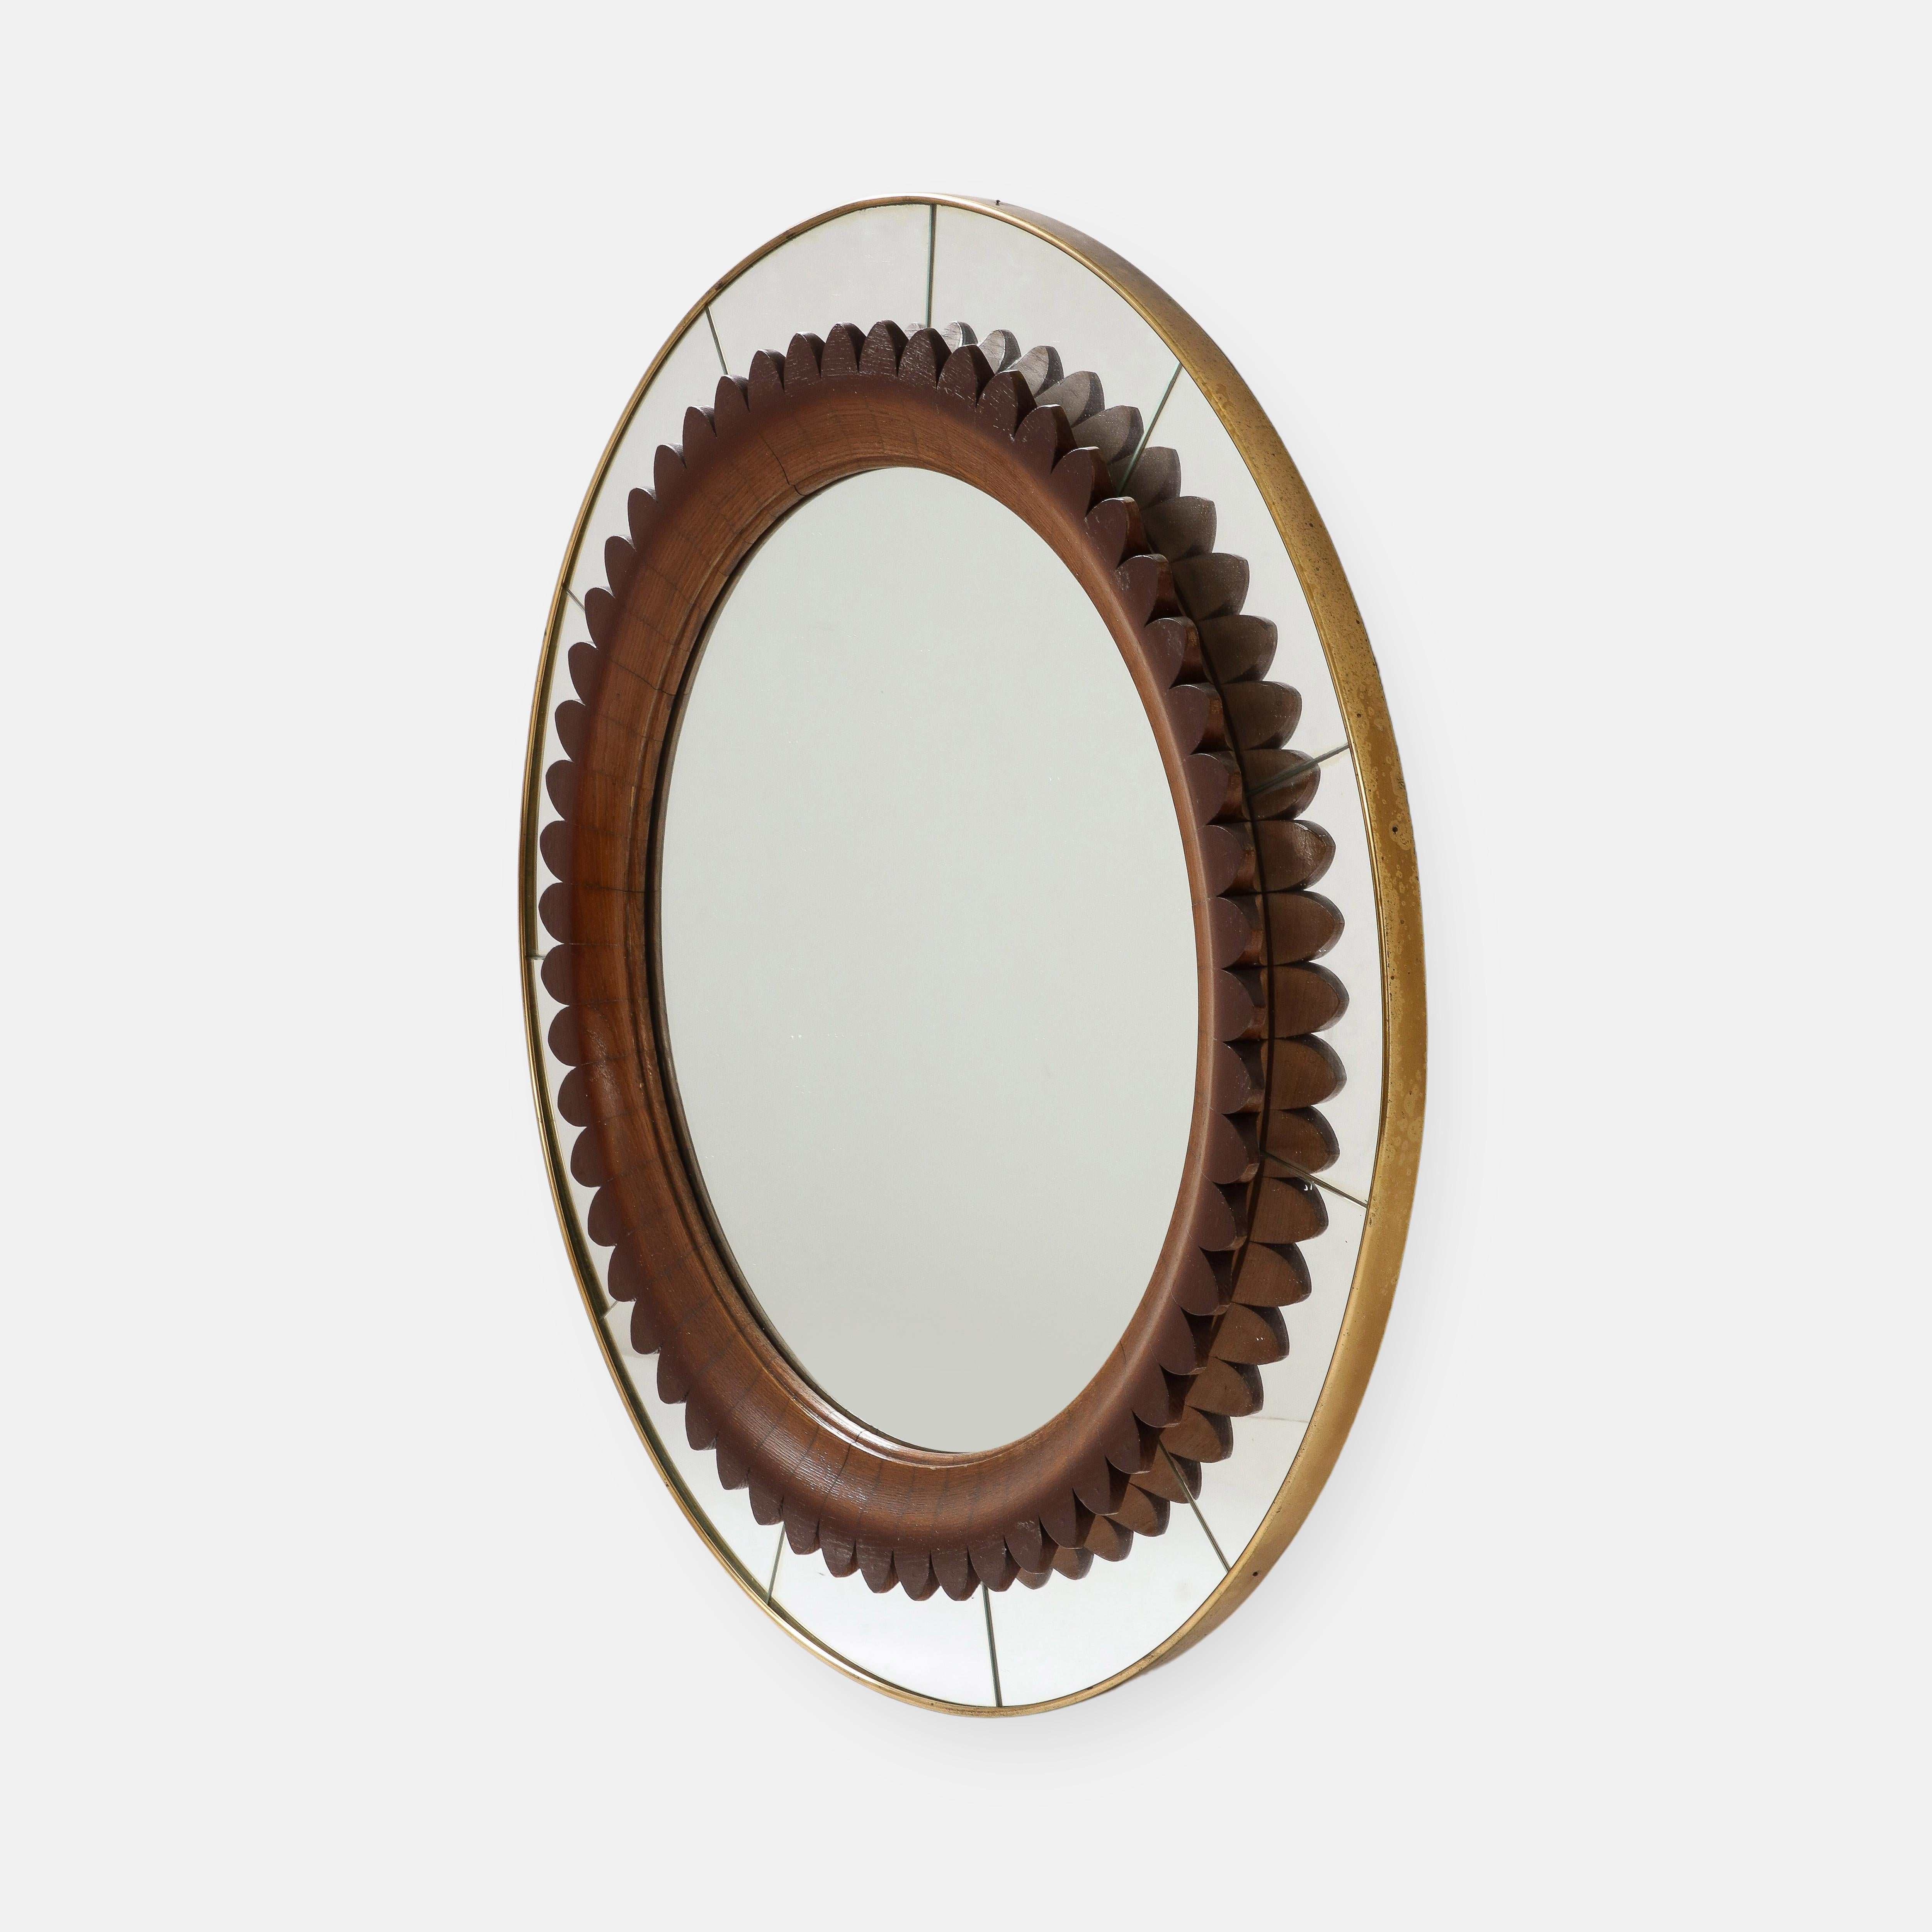 Italian Fratelli Marelli Rare Round Carved Walnut and Brass Wall Mirror, Italy, 1950s For Sale